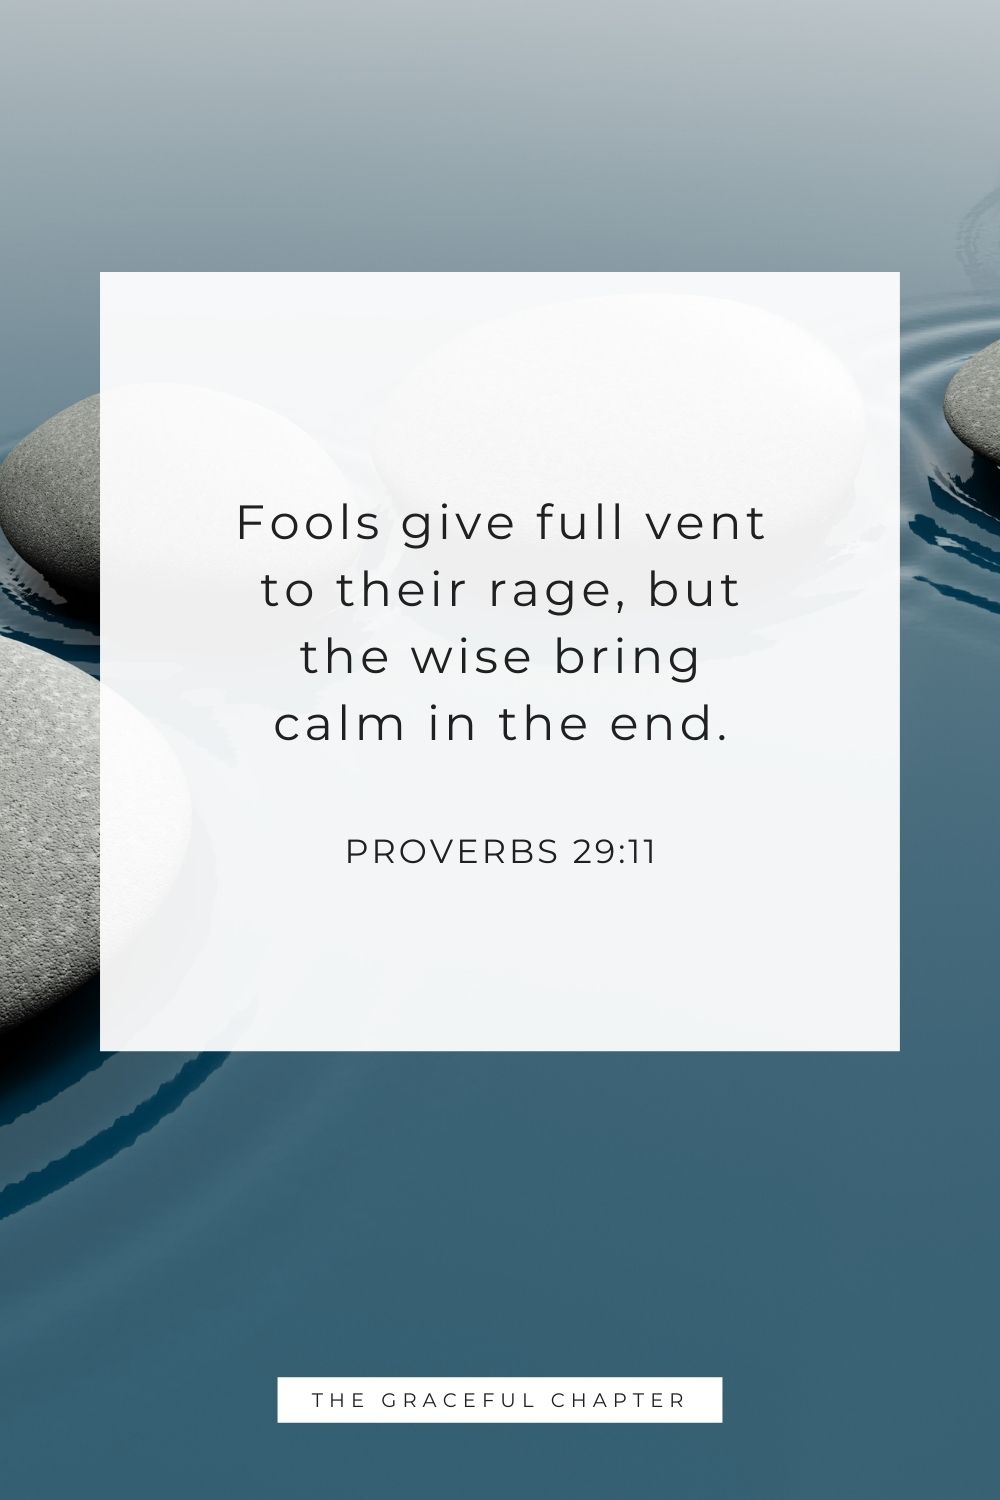 Fools give full vent to their rage, but the wise bring calm in the end. Proverbs 29:11